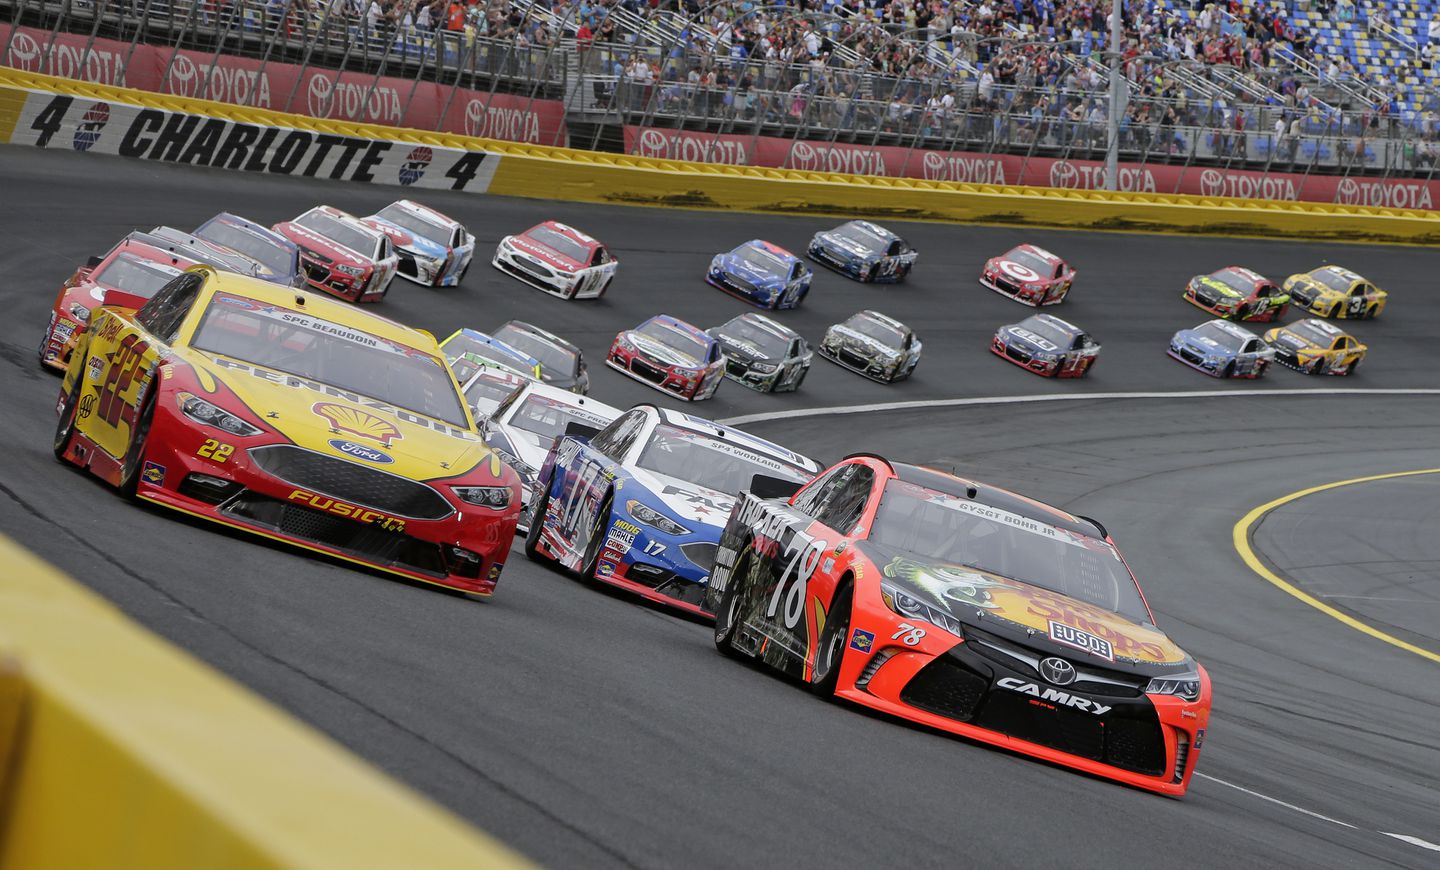 Charlotte Motor Speedway Overview, Stats and Weekend Racing Schedule